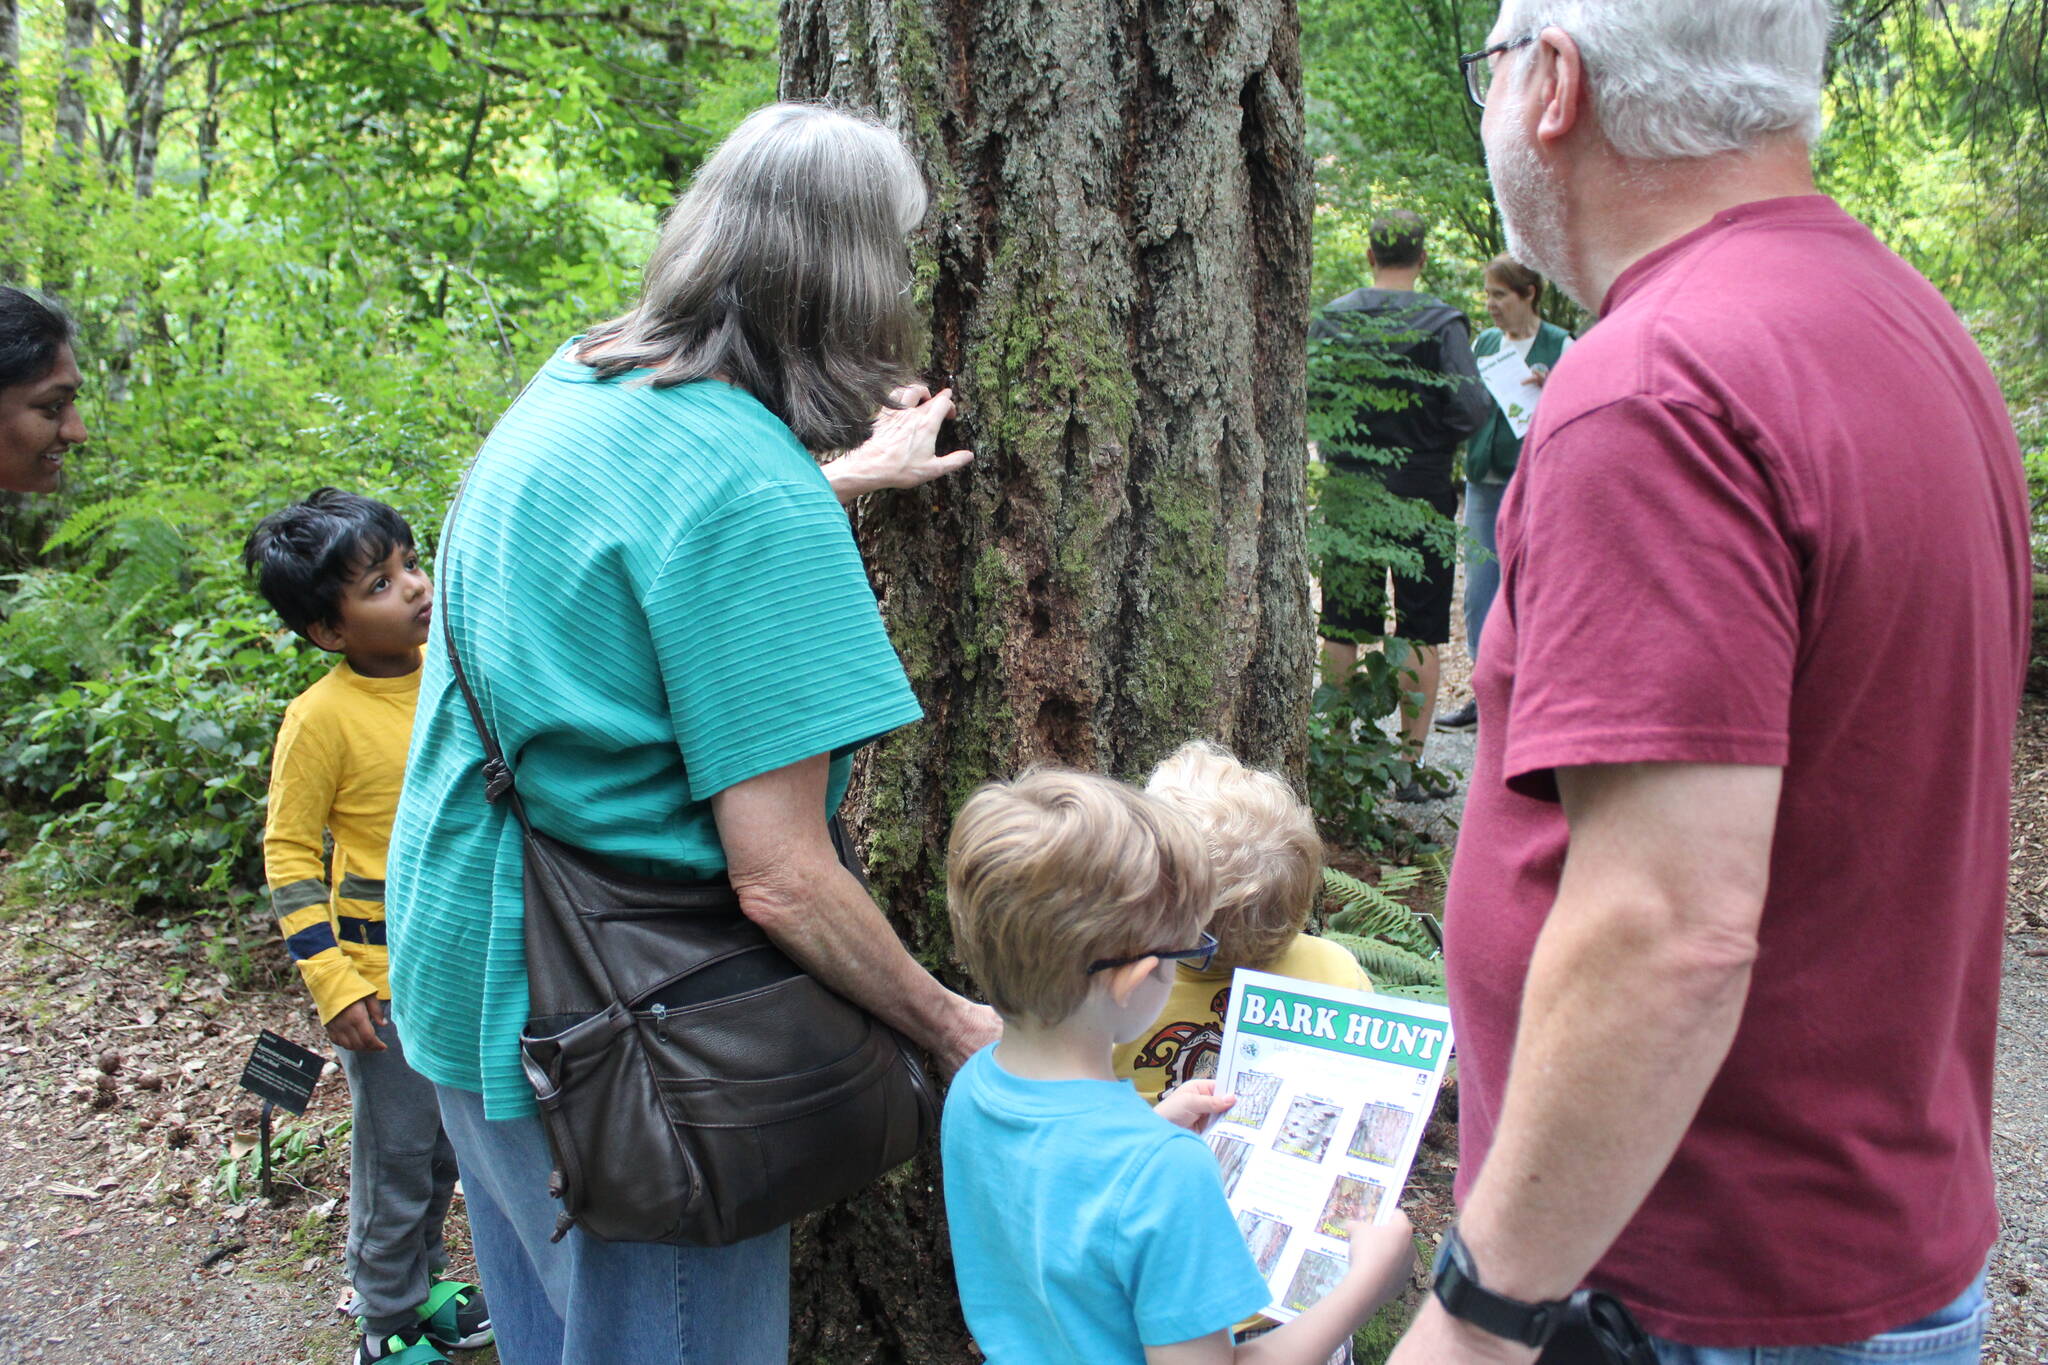 As part of the Tree Tour, everyone was encouraged to touch, smell and even listen to the bark on the trees of the Arboretum. Photo by Bailey Jo Josie/Sound Publishing.